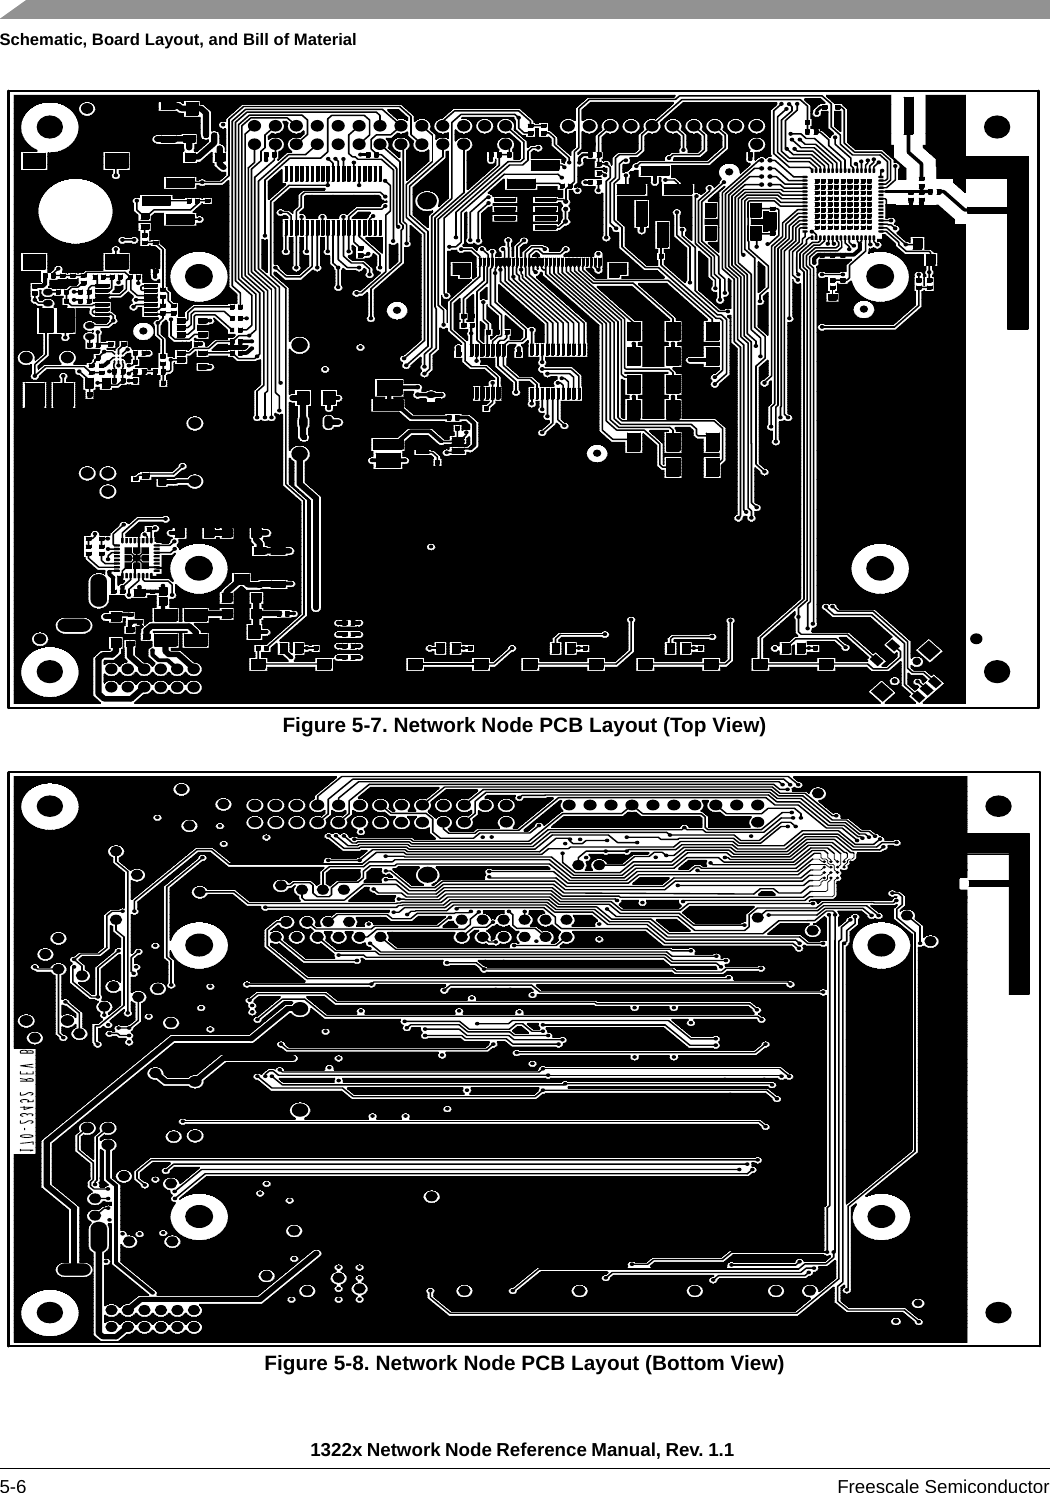 Schematic, Board Layout, and Bill of Material1322x Network Node Reference Manual, Rev. 1.1 5-6 Freescale SemiconductorFigure 5-7. Network Node PCB Layout (Top View)Figure 5-8. Network Node PCB Layout (Bottom View)